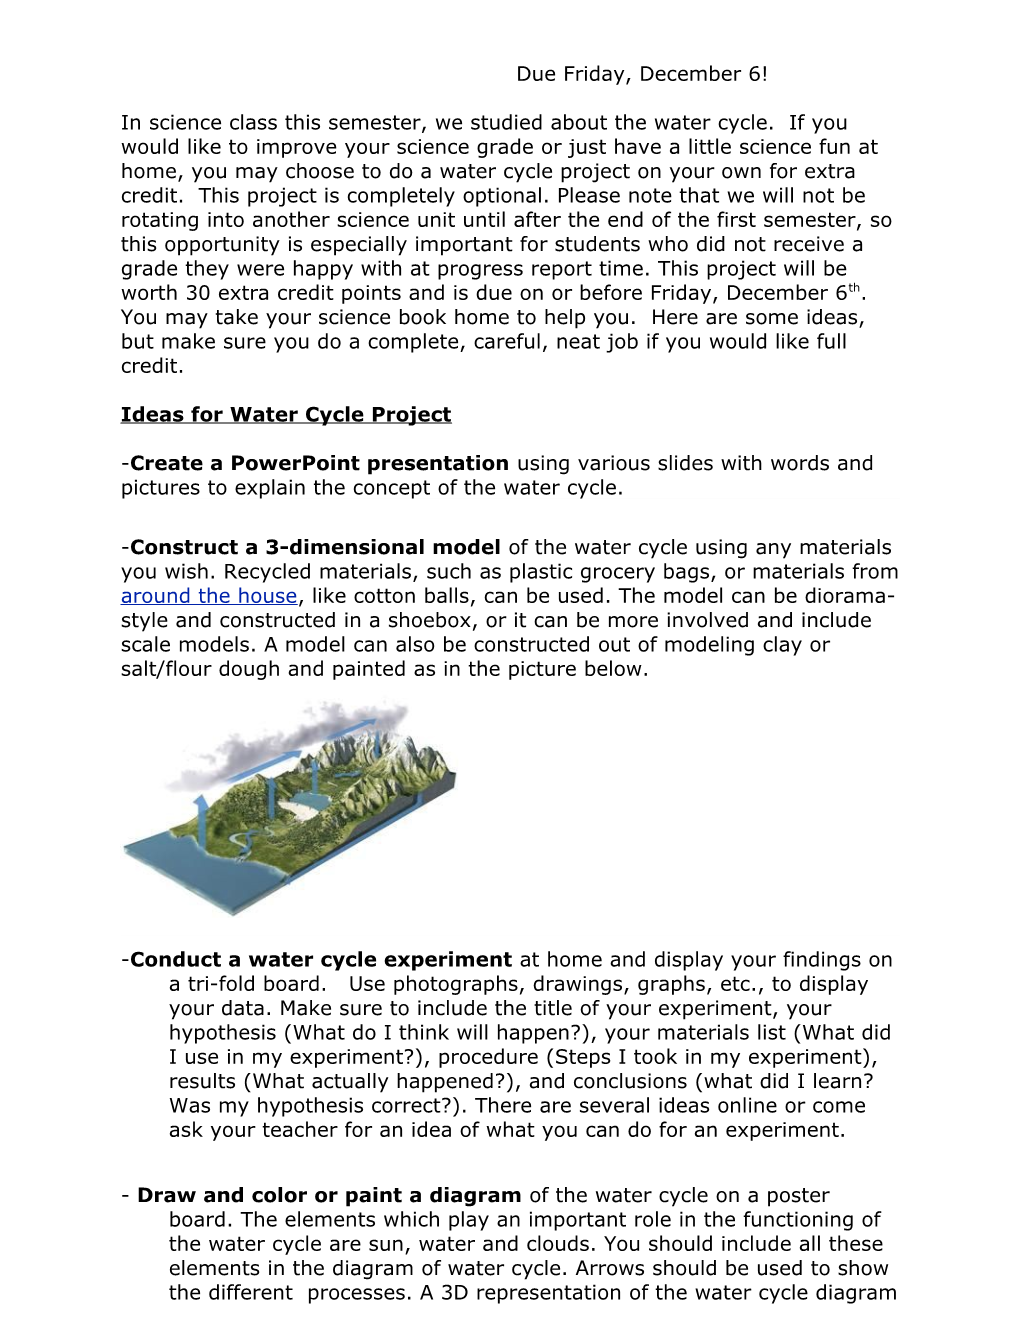 Ideas for Water Cycle Project - Create a Powerpoint Presentation Using Various Slides